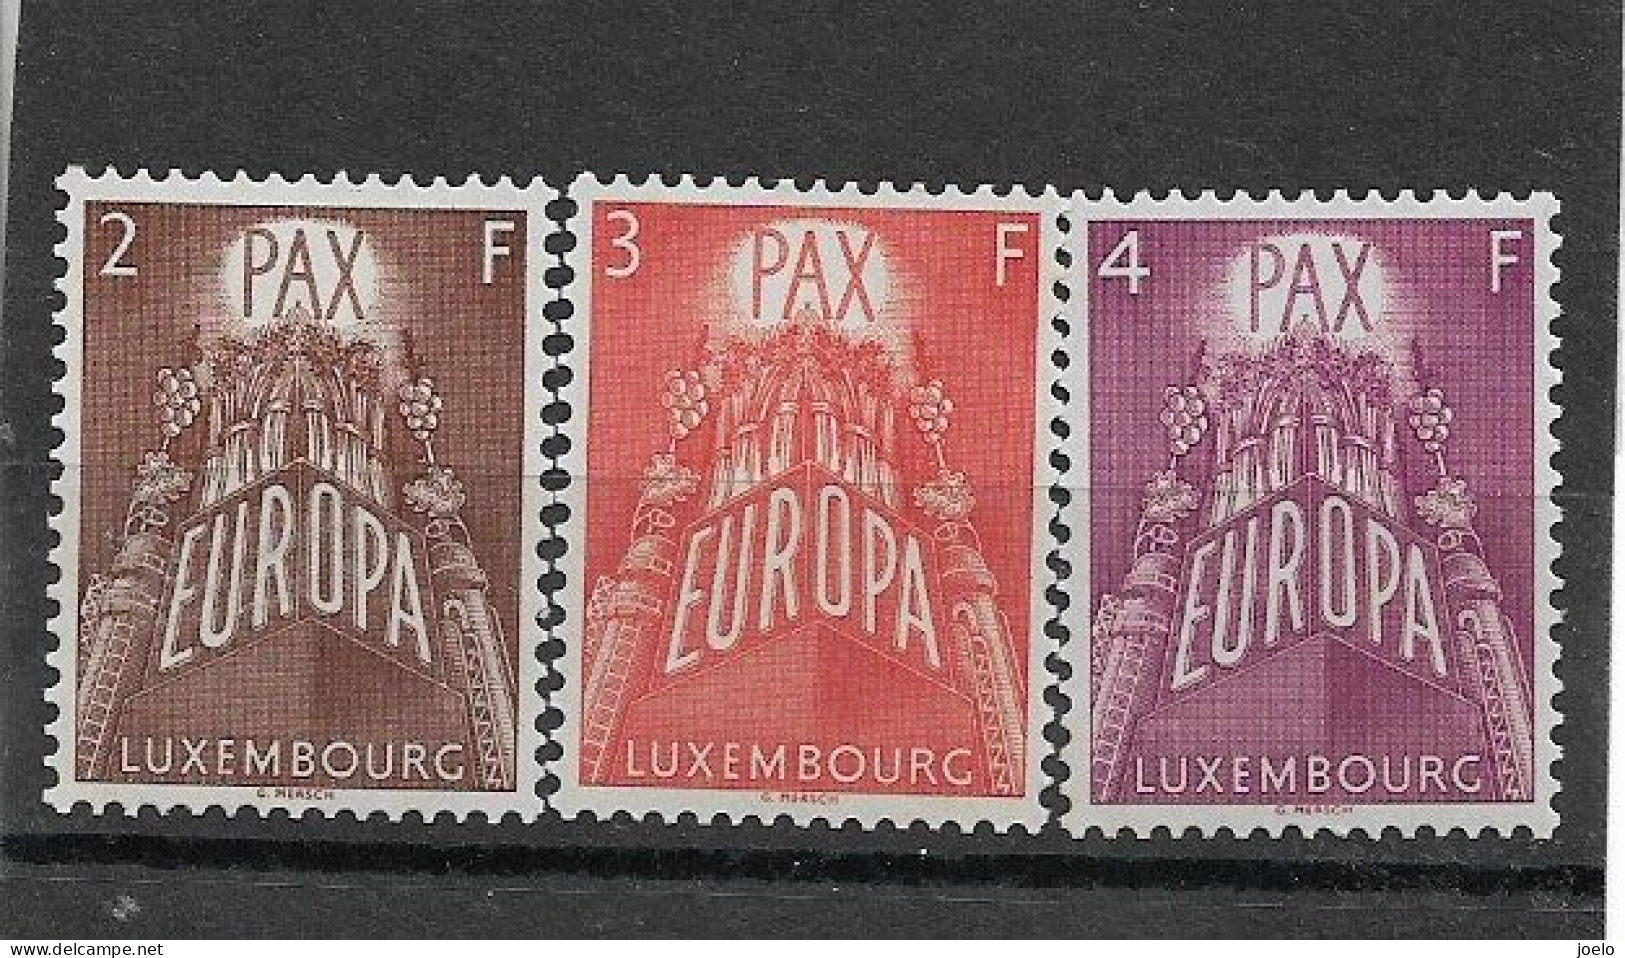 LUXEMBOURG 1957 EUROPA MH SET - 1957